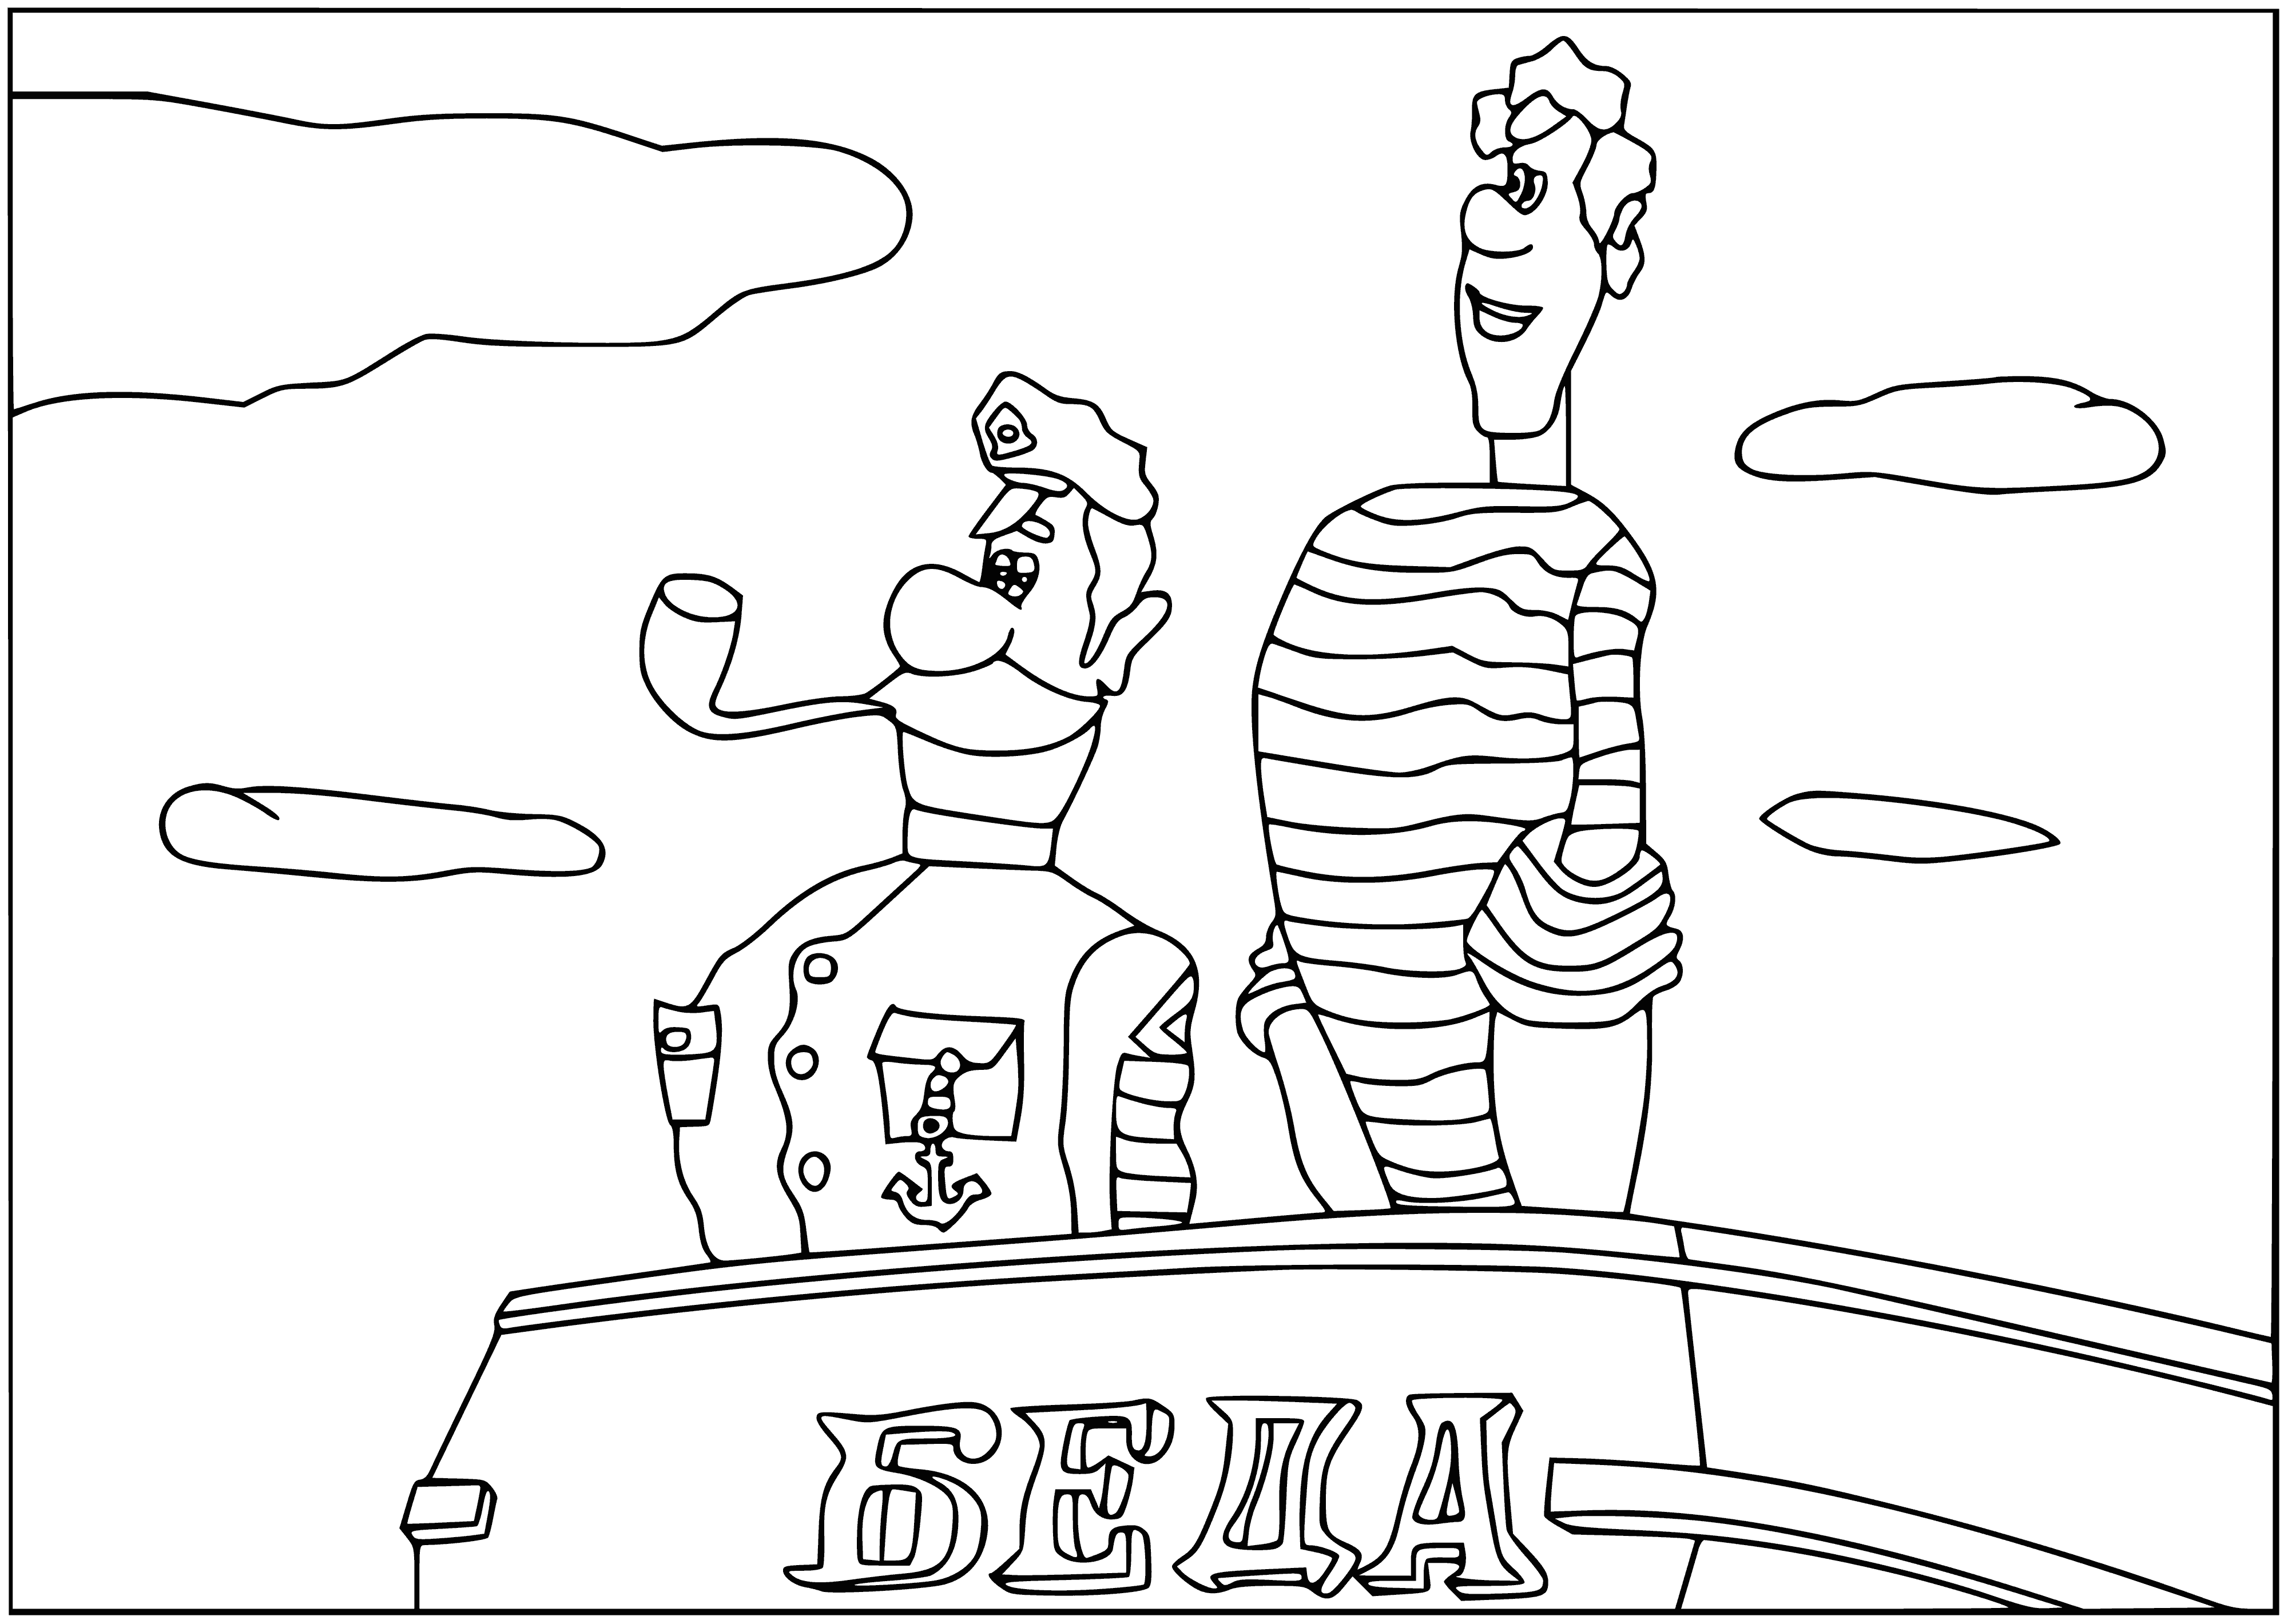 coloring page: Pirate Captain Vrungel & crew sail the seas aboard the Scrap, carrying a large treasure chest; their black flag adorned w/white skull & crossbones.